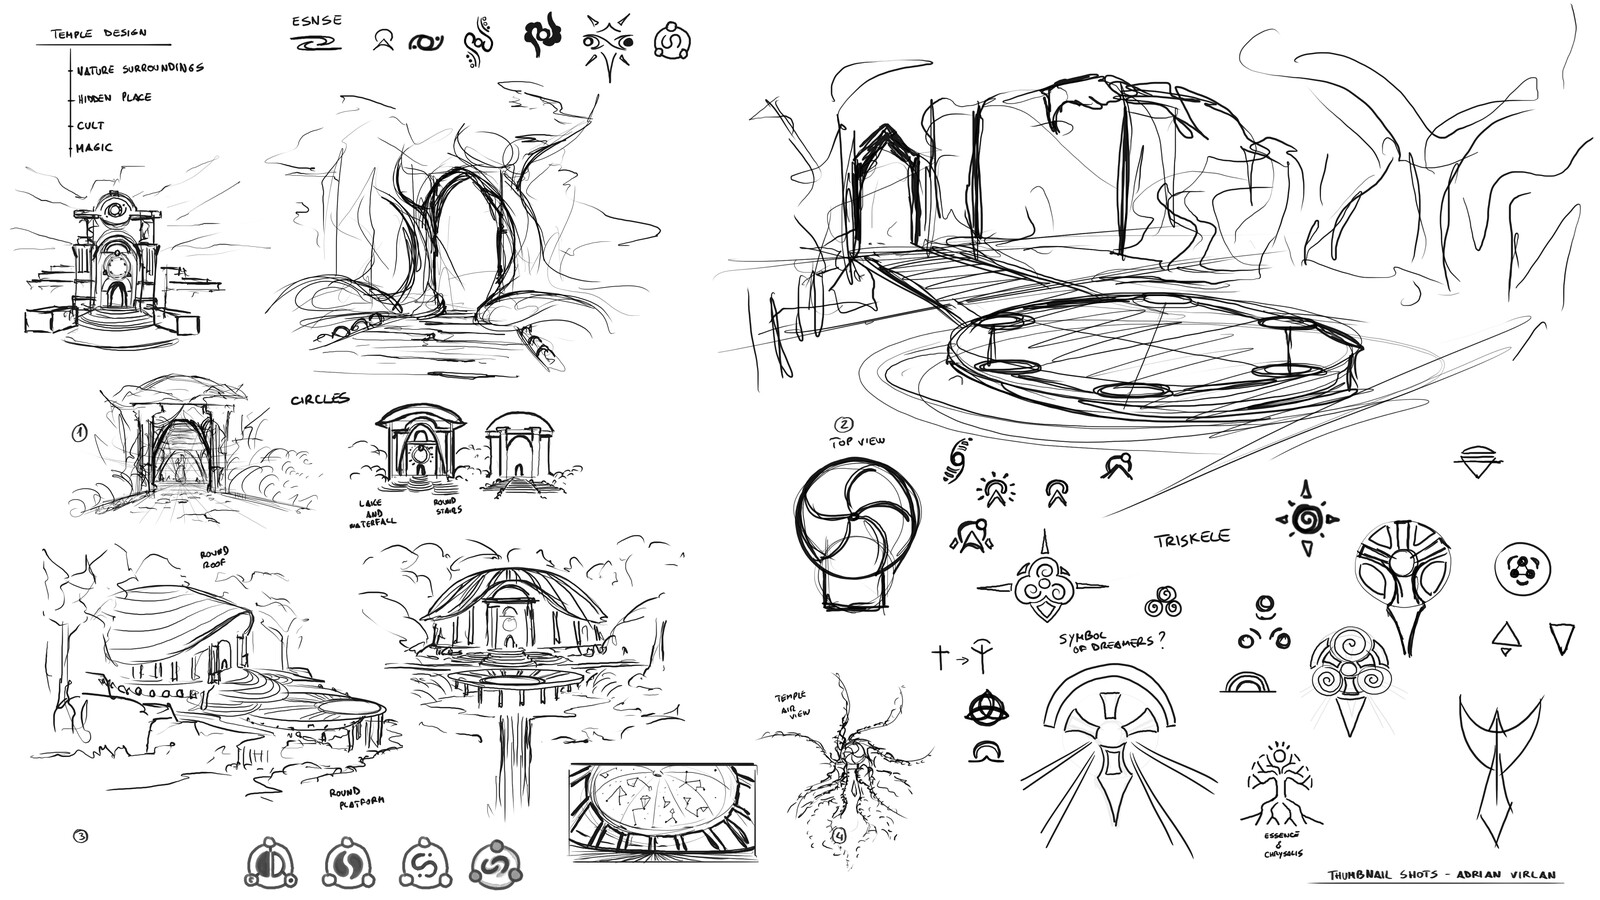 Dirtiest sketches figuring out symbols and surroundings of the ancient temple area.